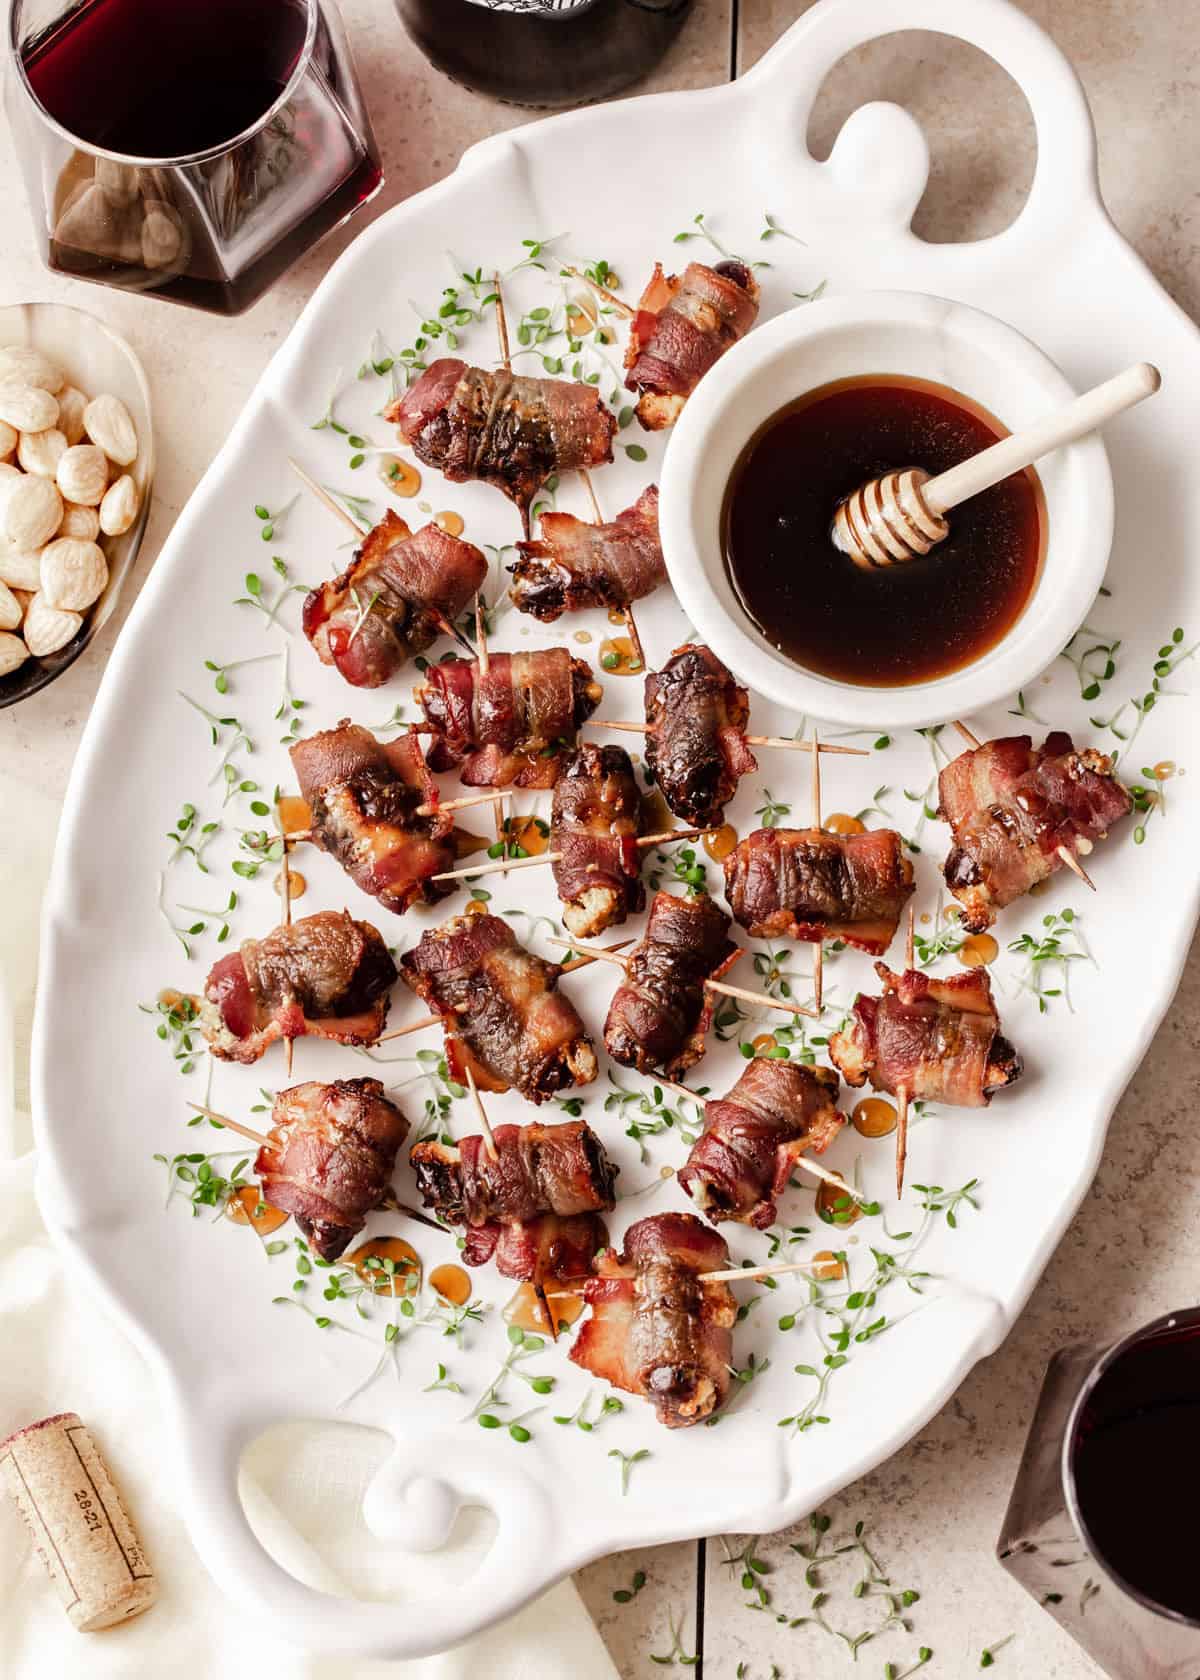 white platter filled with bacon wrapped dates appetizers with small bowl of honey, surrounded by nuts and wine glasses, overhead view.